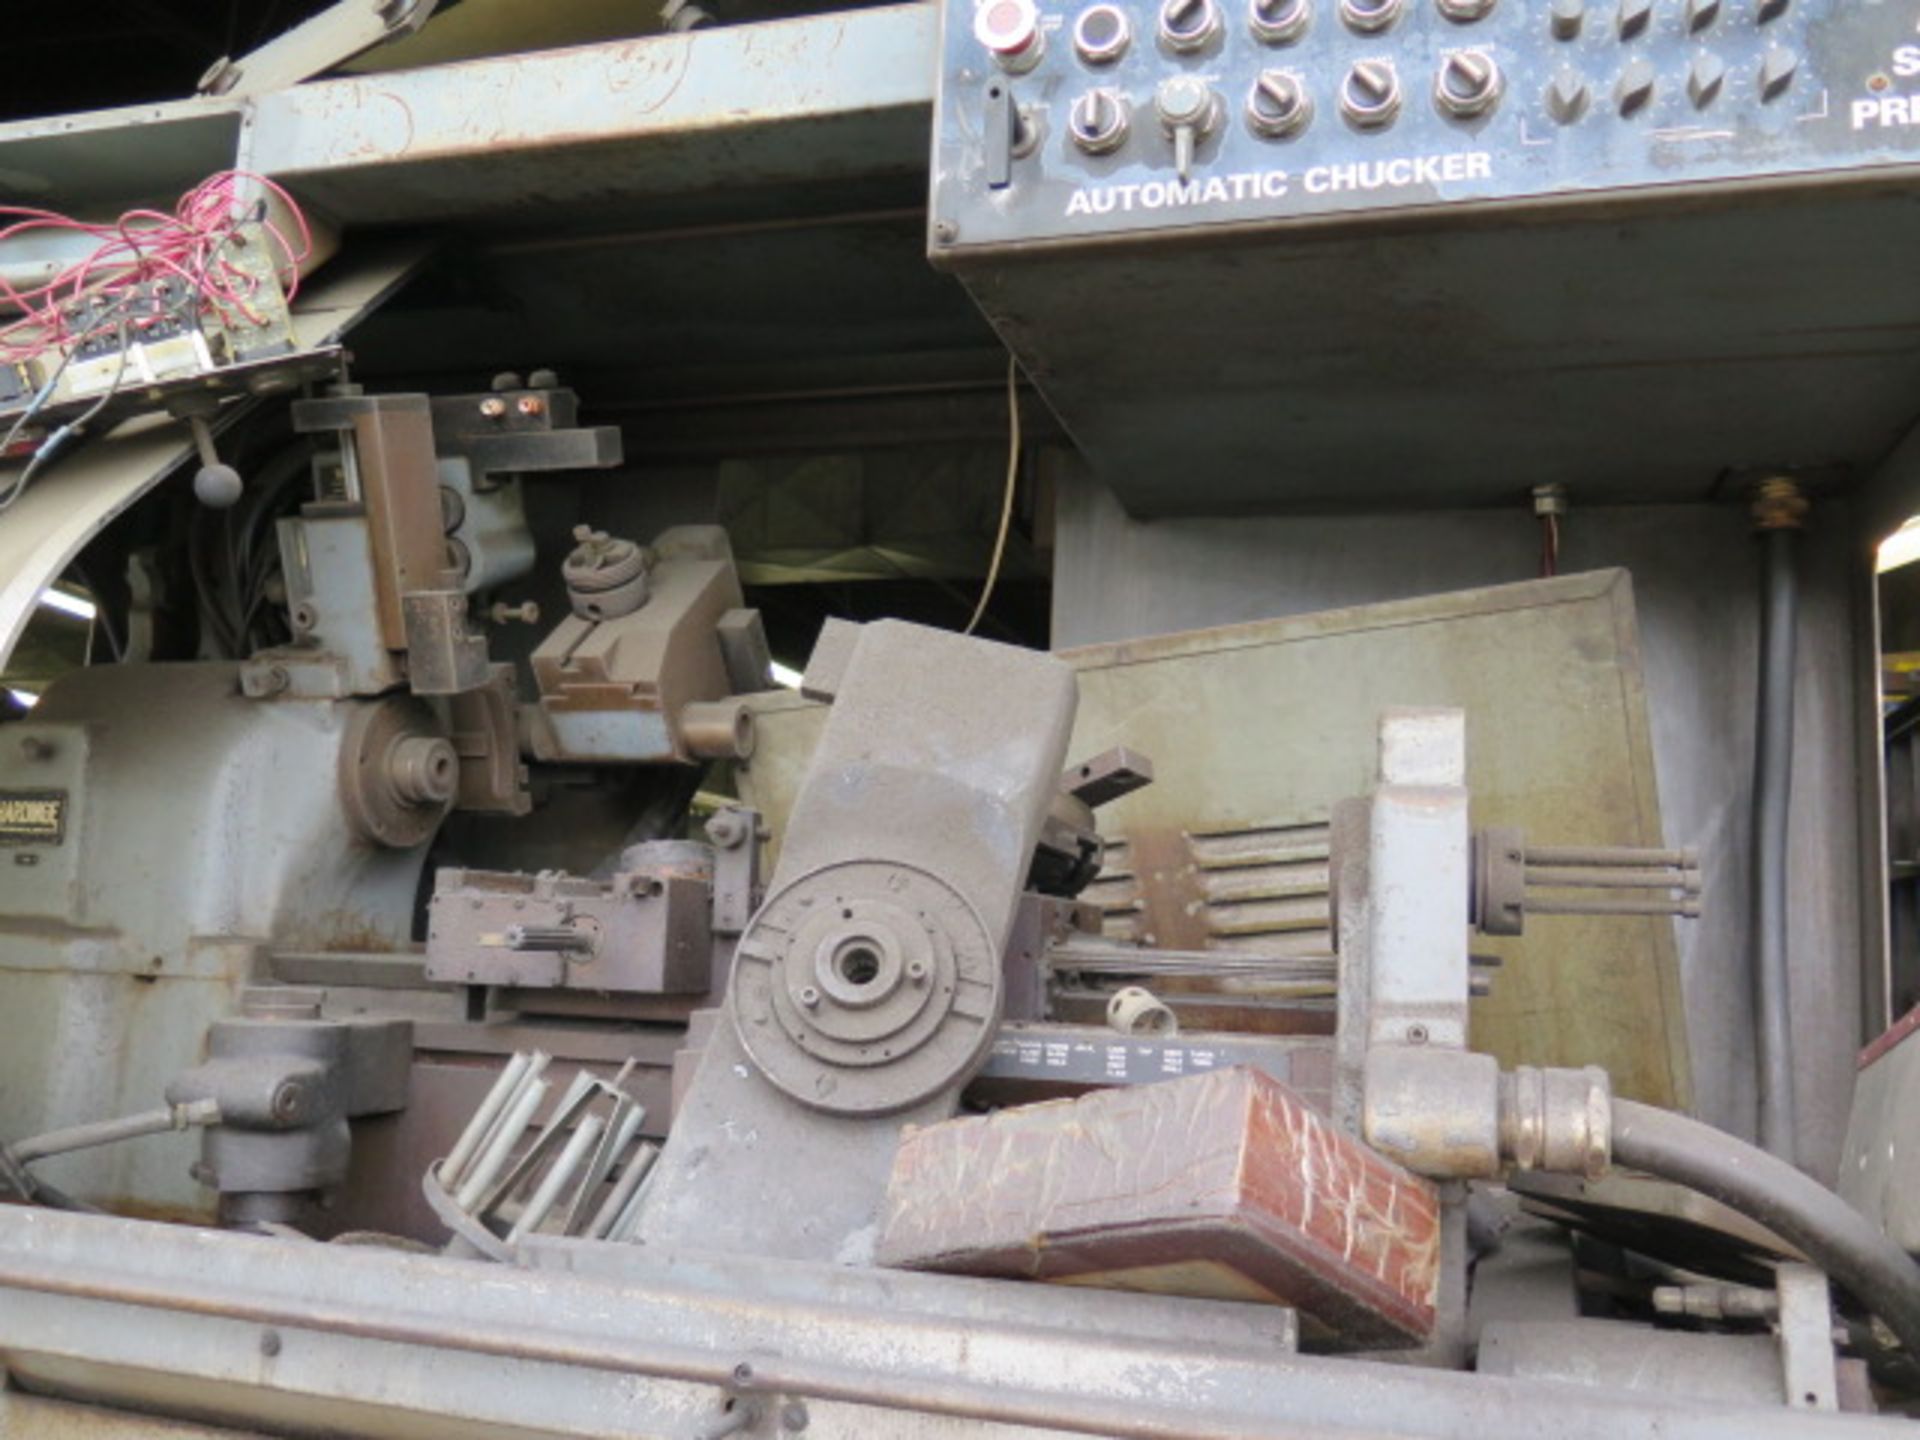 Hardinge AHC Automatic Hand Chucker (FOR PARTS) w/ Hardinge Controls, 8-Station Turret, SOLD AS IS - Image 3 of 6